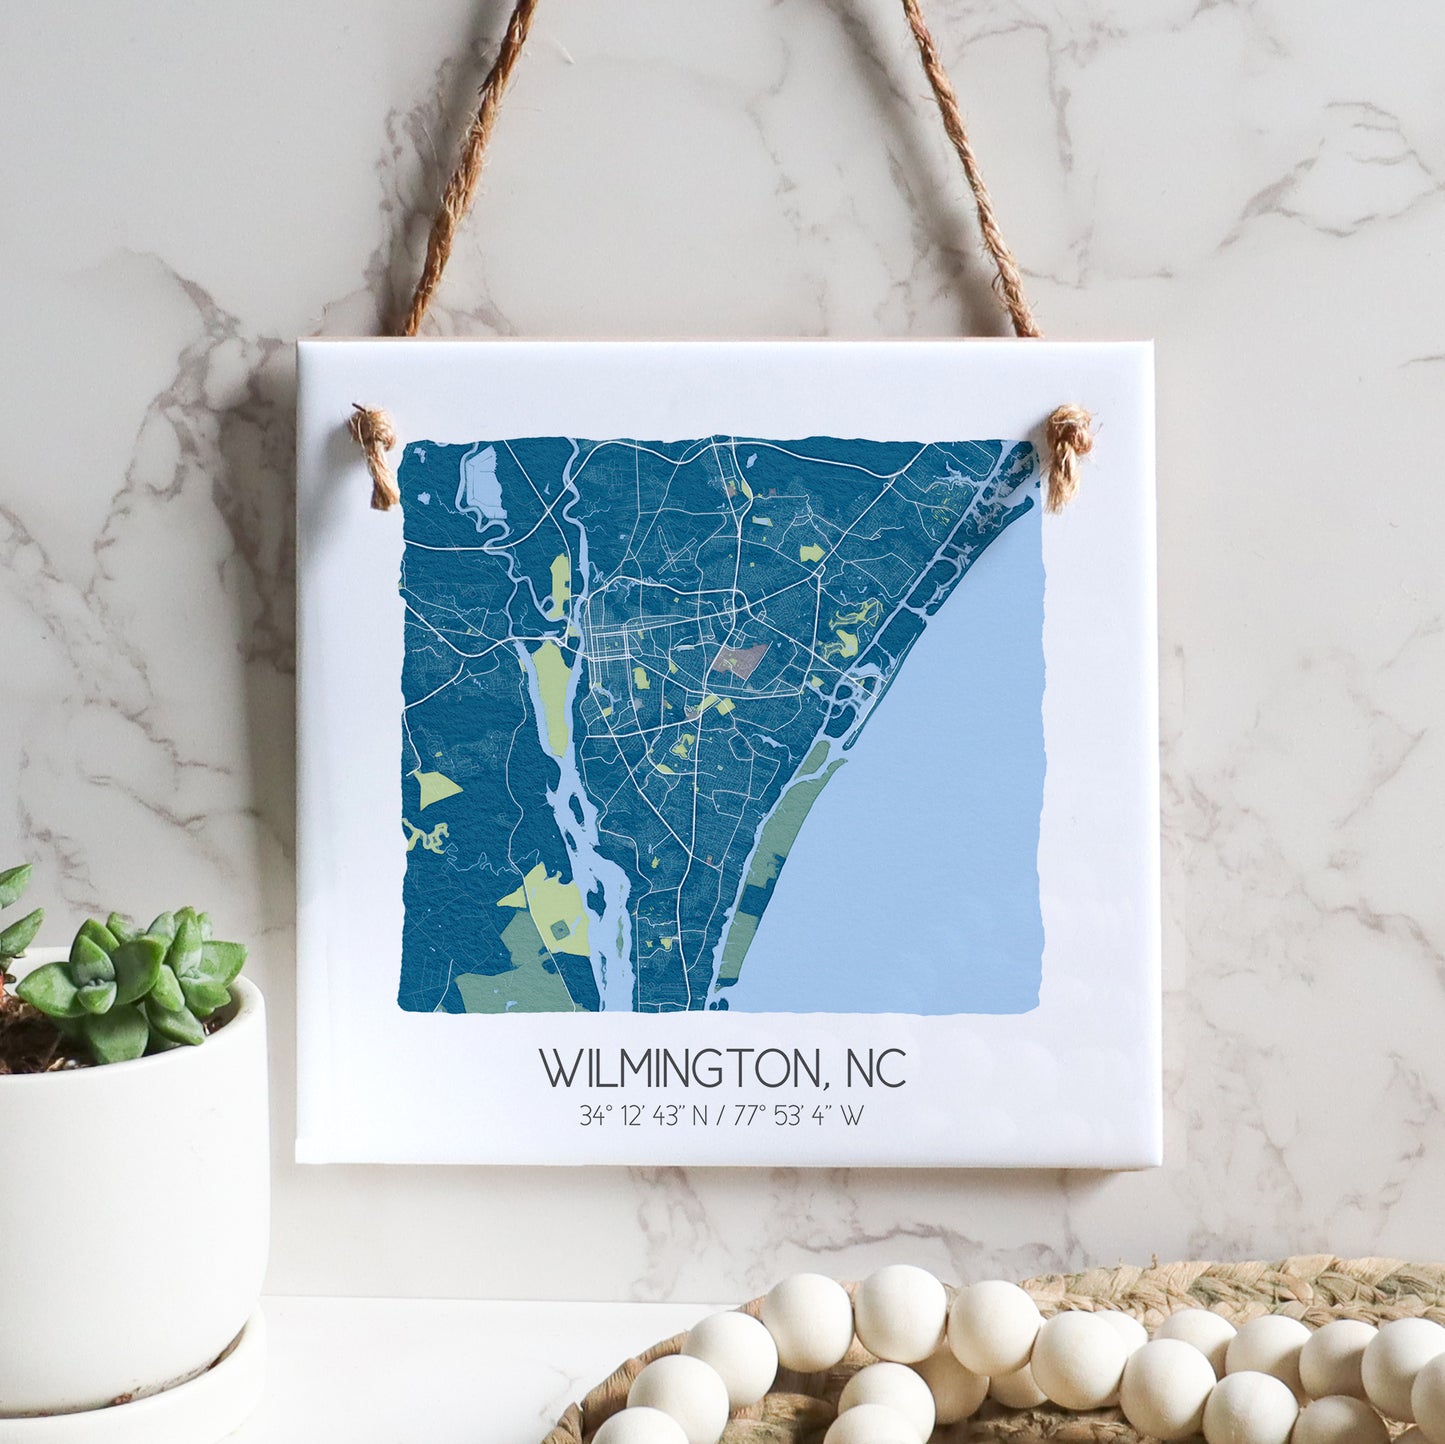 A city map of Wilmington North Carolina on a square ceramic tile sign hanging on a wall, in the color blue